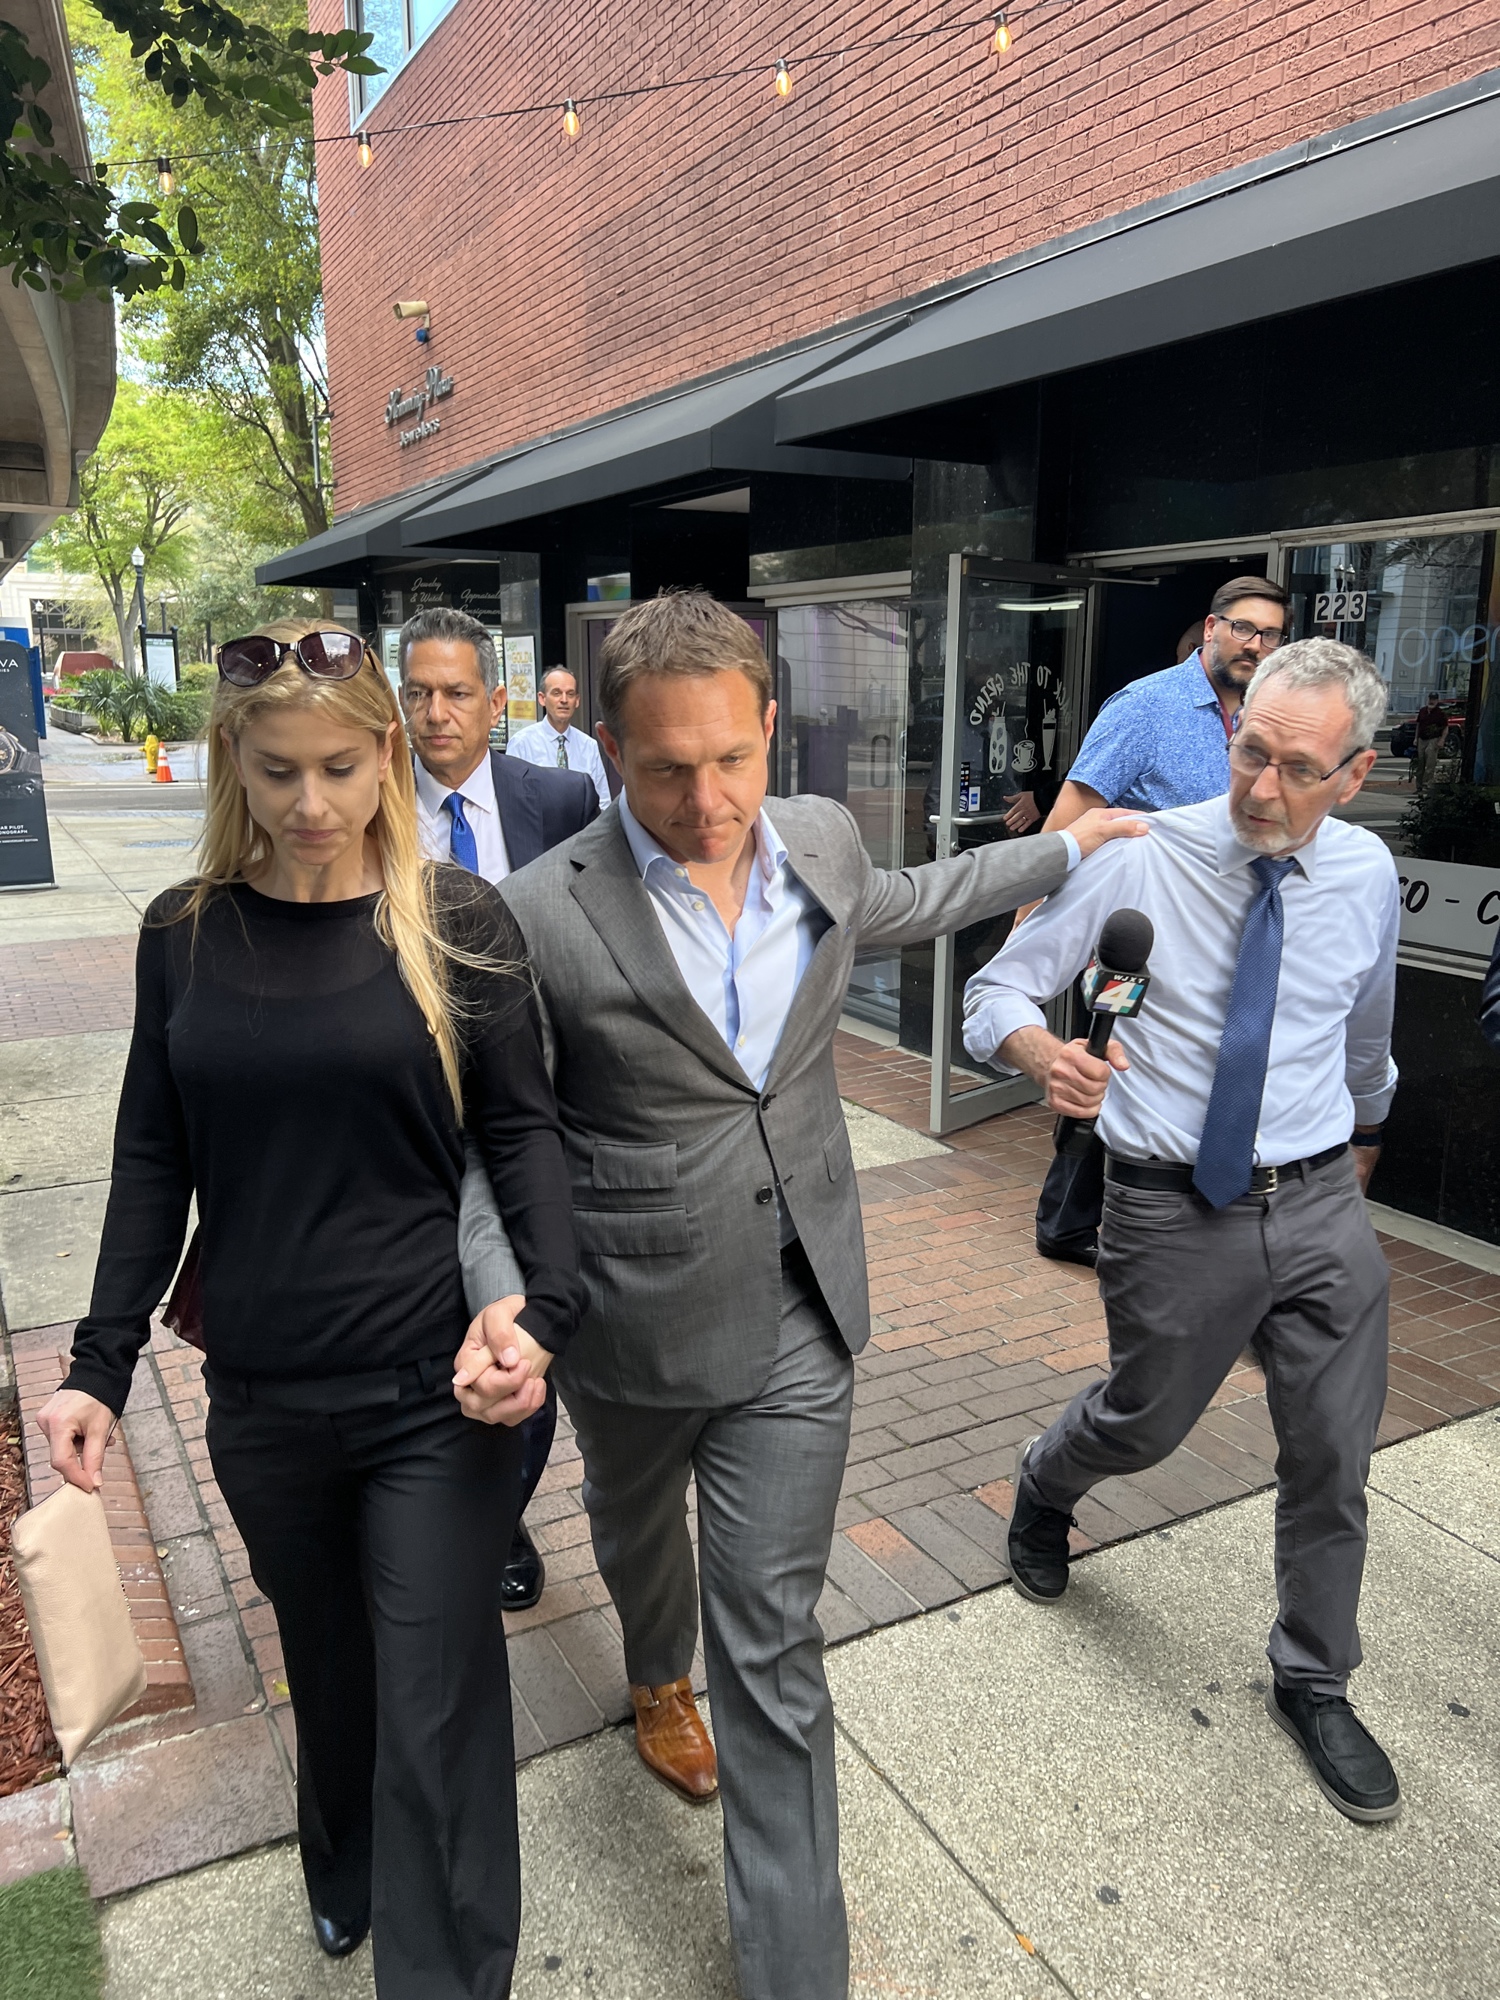 Former JEA CEO Aaron Zahn walks with his wife while being questioned by members of the news media March 8 after leaving the federal courthouse where he pleaded not guilty to federal charges.